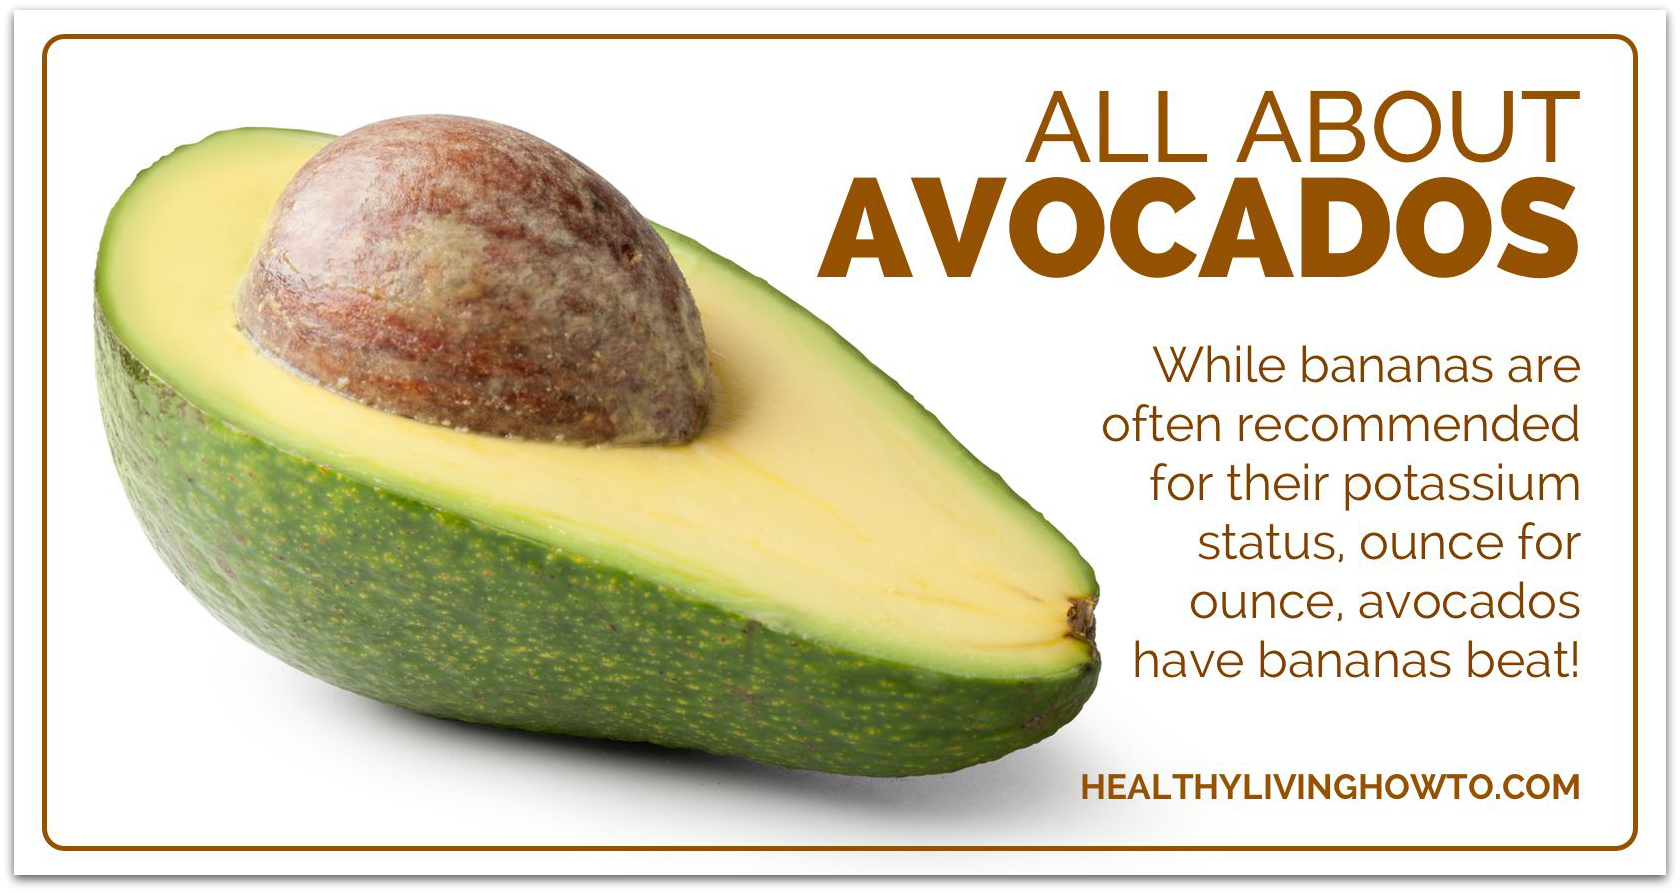 All About Avocados | healthylivinghowto.com